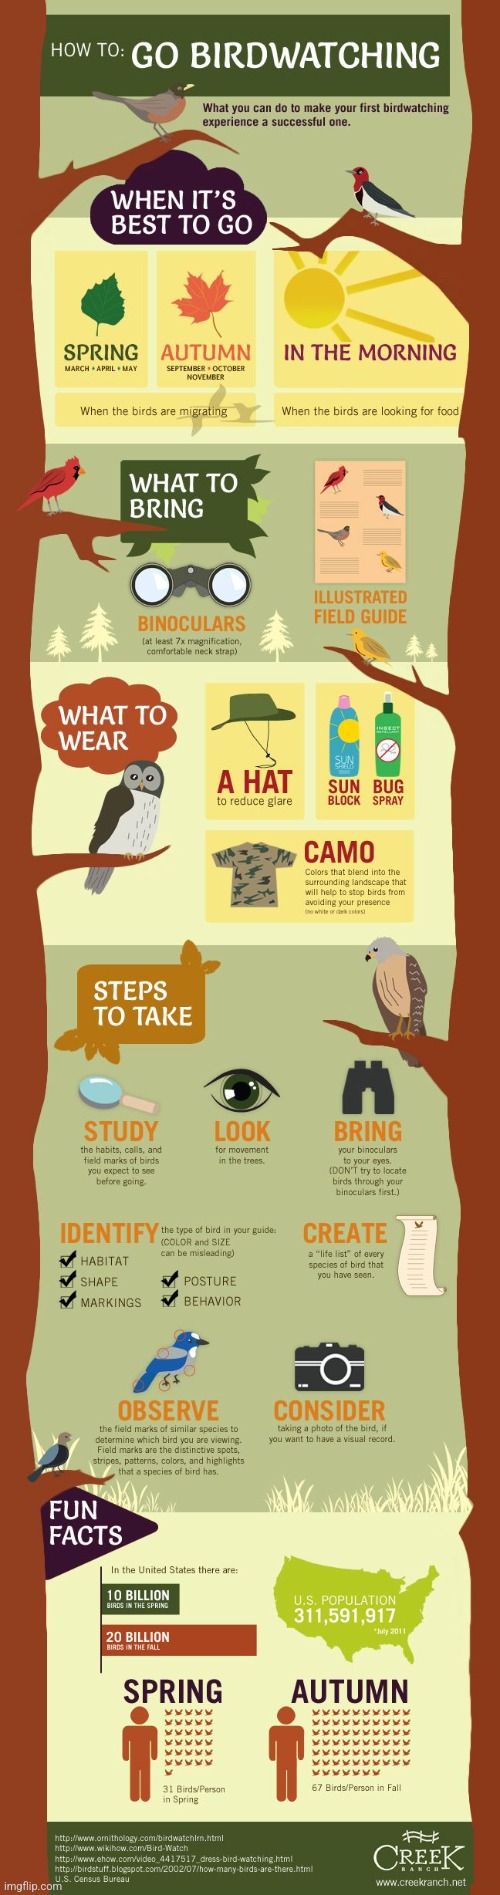 HOW TO GO BIRDWATCHING: An Infographic I Found Online (Repost - NOT MINE) | image tagged in simothefinlandized,birdwatching,infographic,repost | made w/ Imgflip meme maker